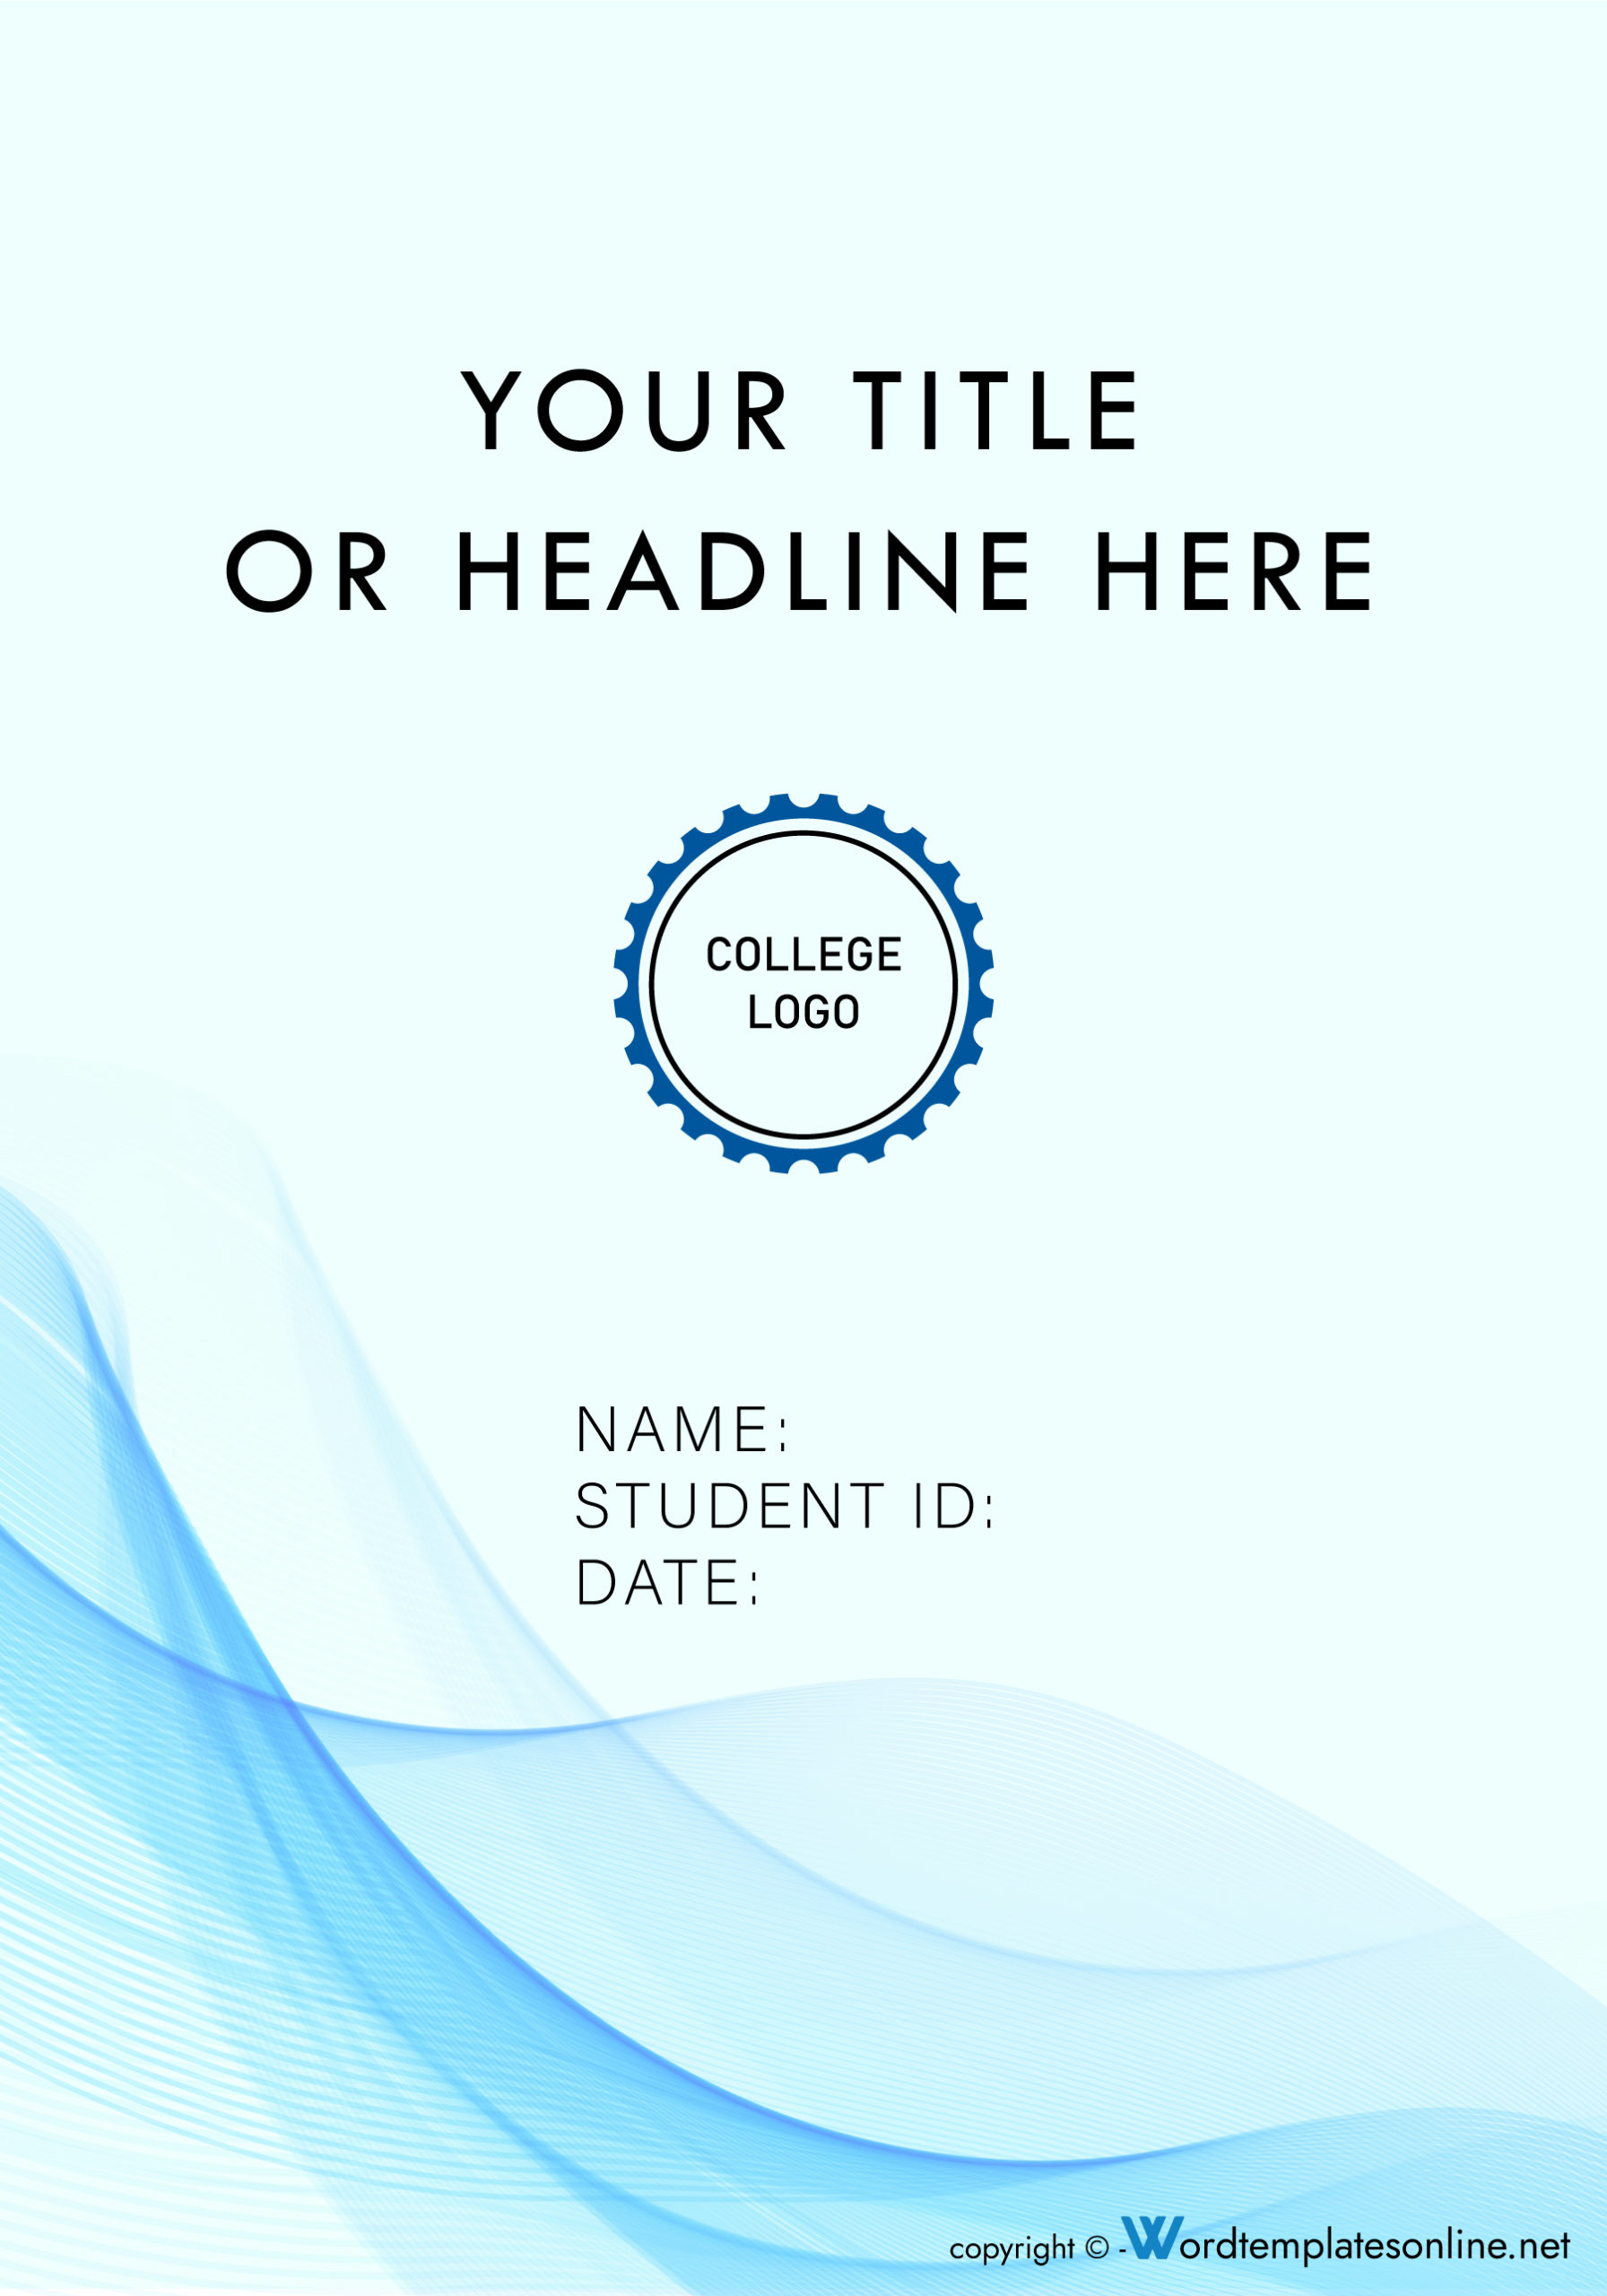 48 Amazing Cover Page Examples & Templates | Word, AI, PDF